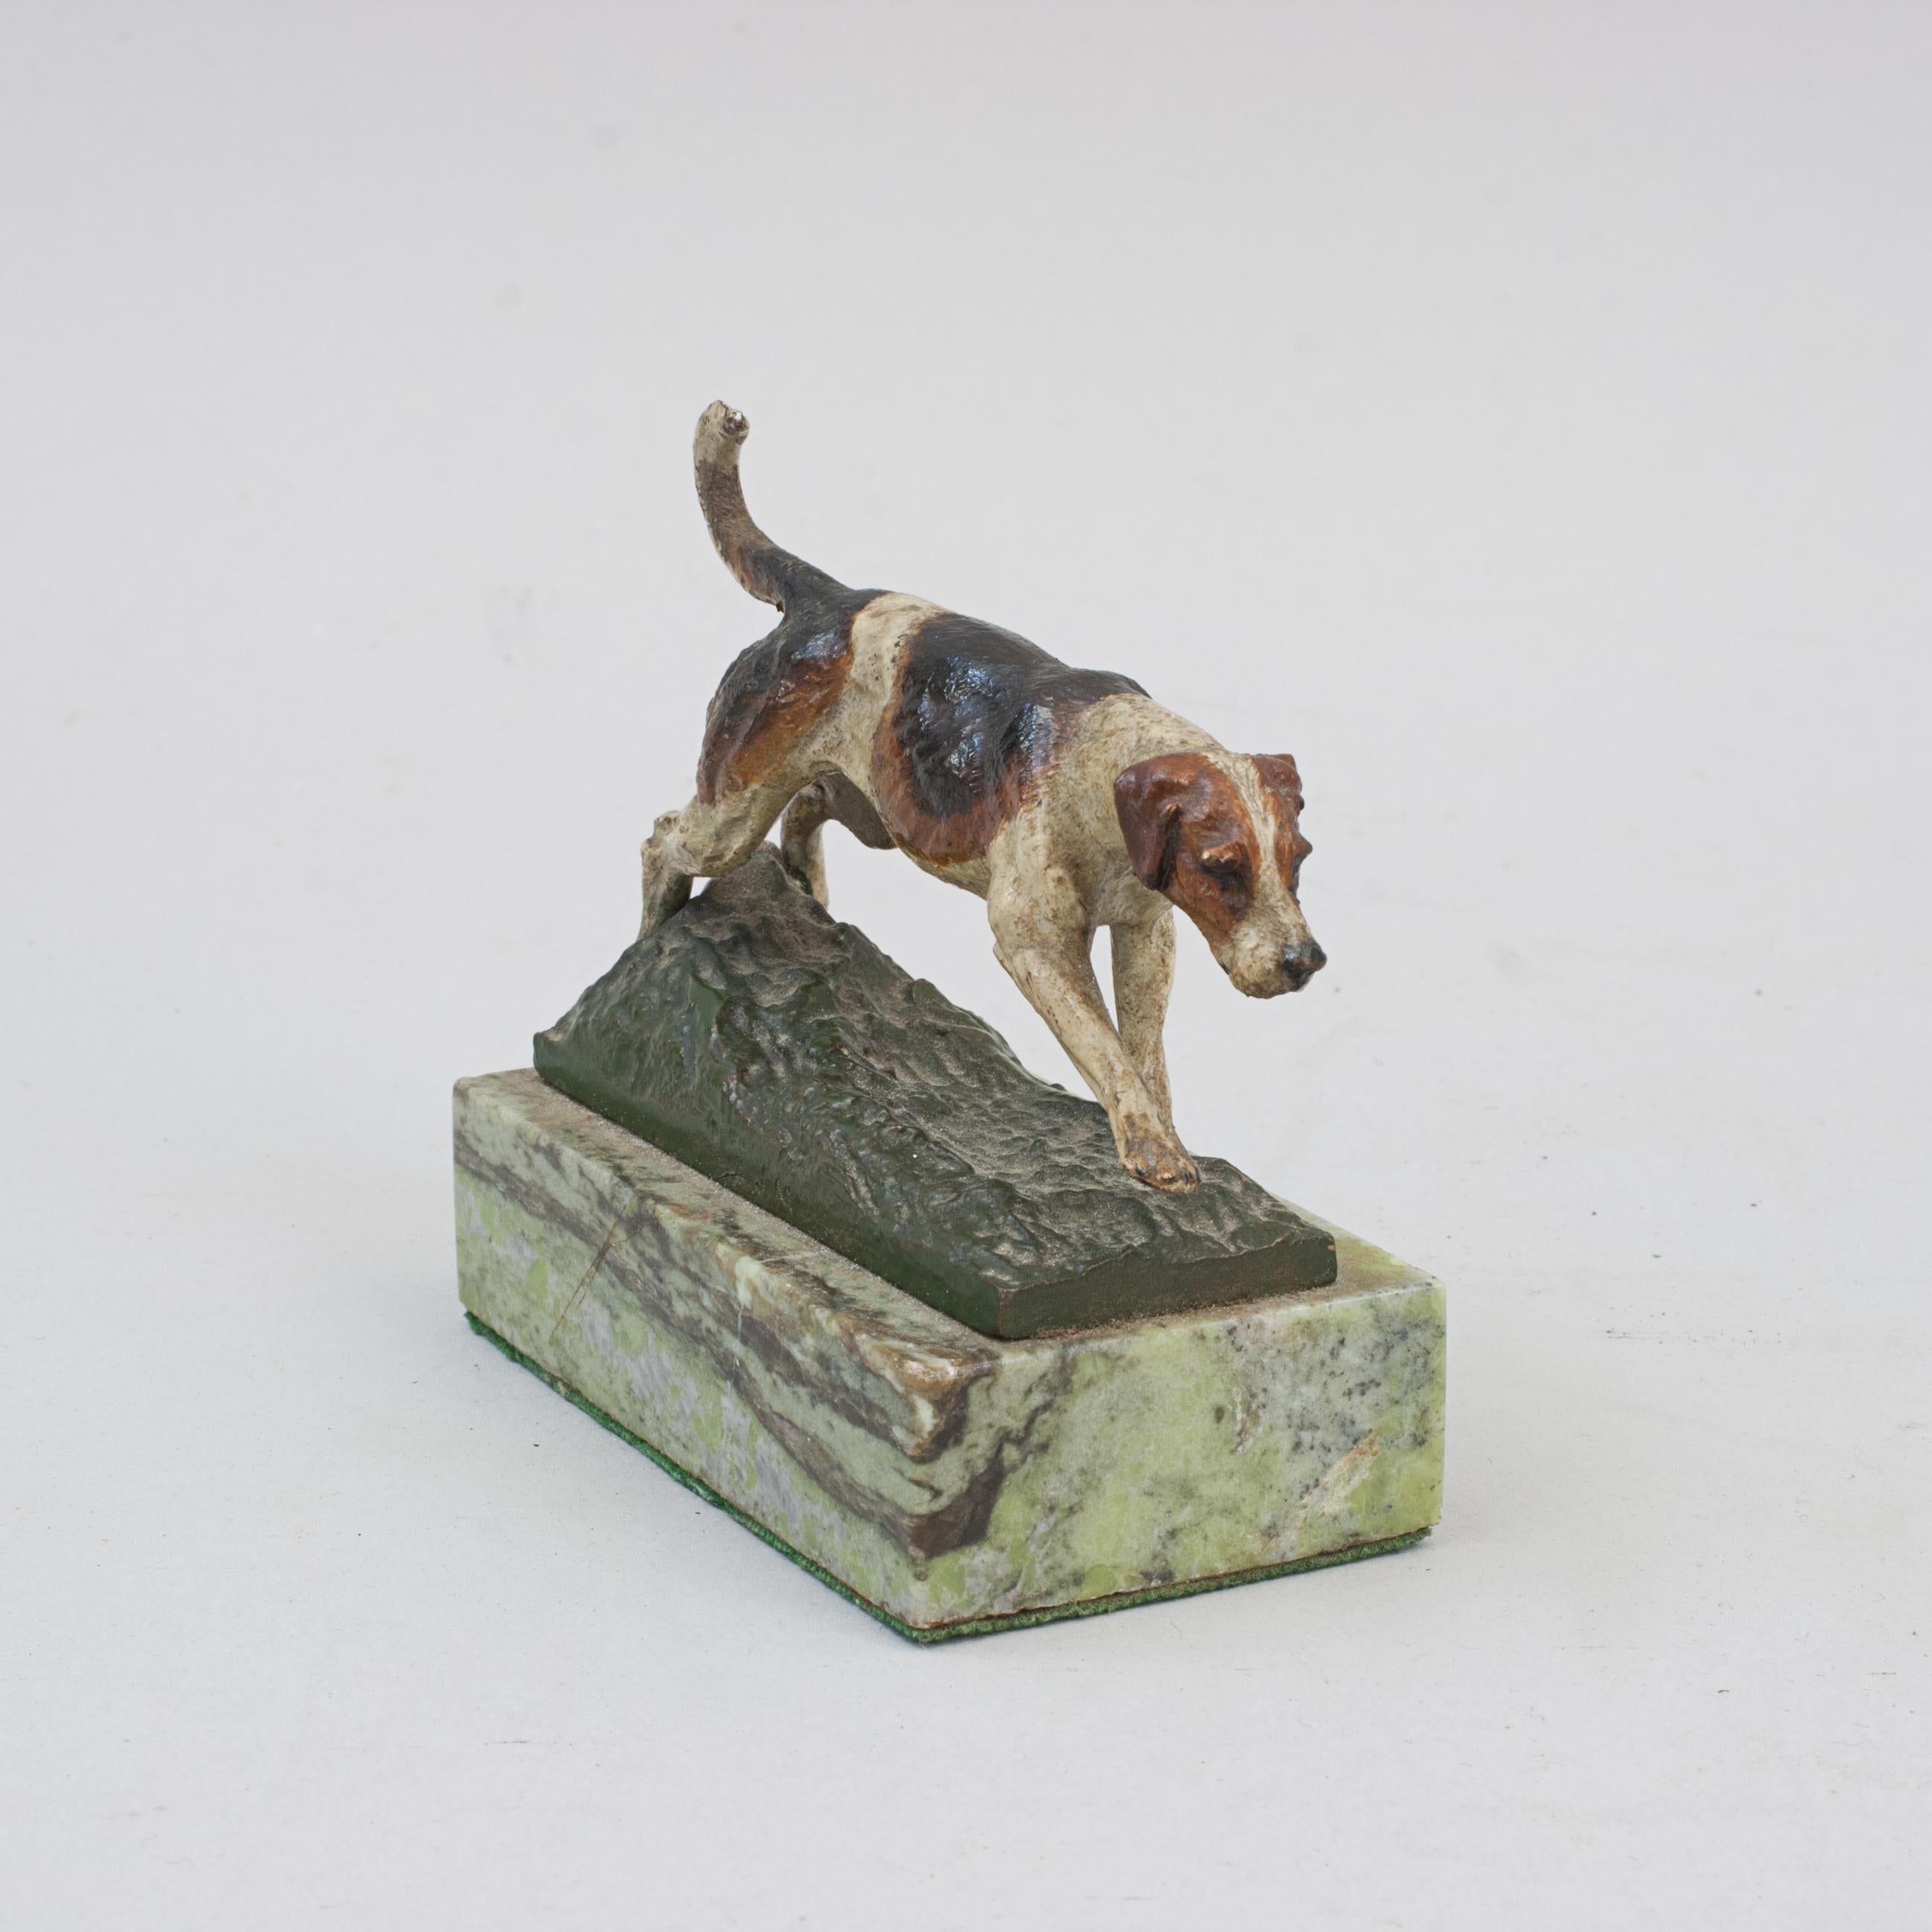 Antique Vienna Bronze Foxhound.
A high quality Austrian/Vienna cold painted bronze study of a fox hound. The hunting dog is well cast and painted but with minor paint loss to the tail. Mounted on a rectangular green veined marble base. Initialled